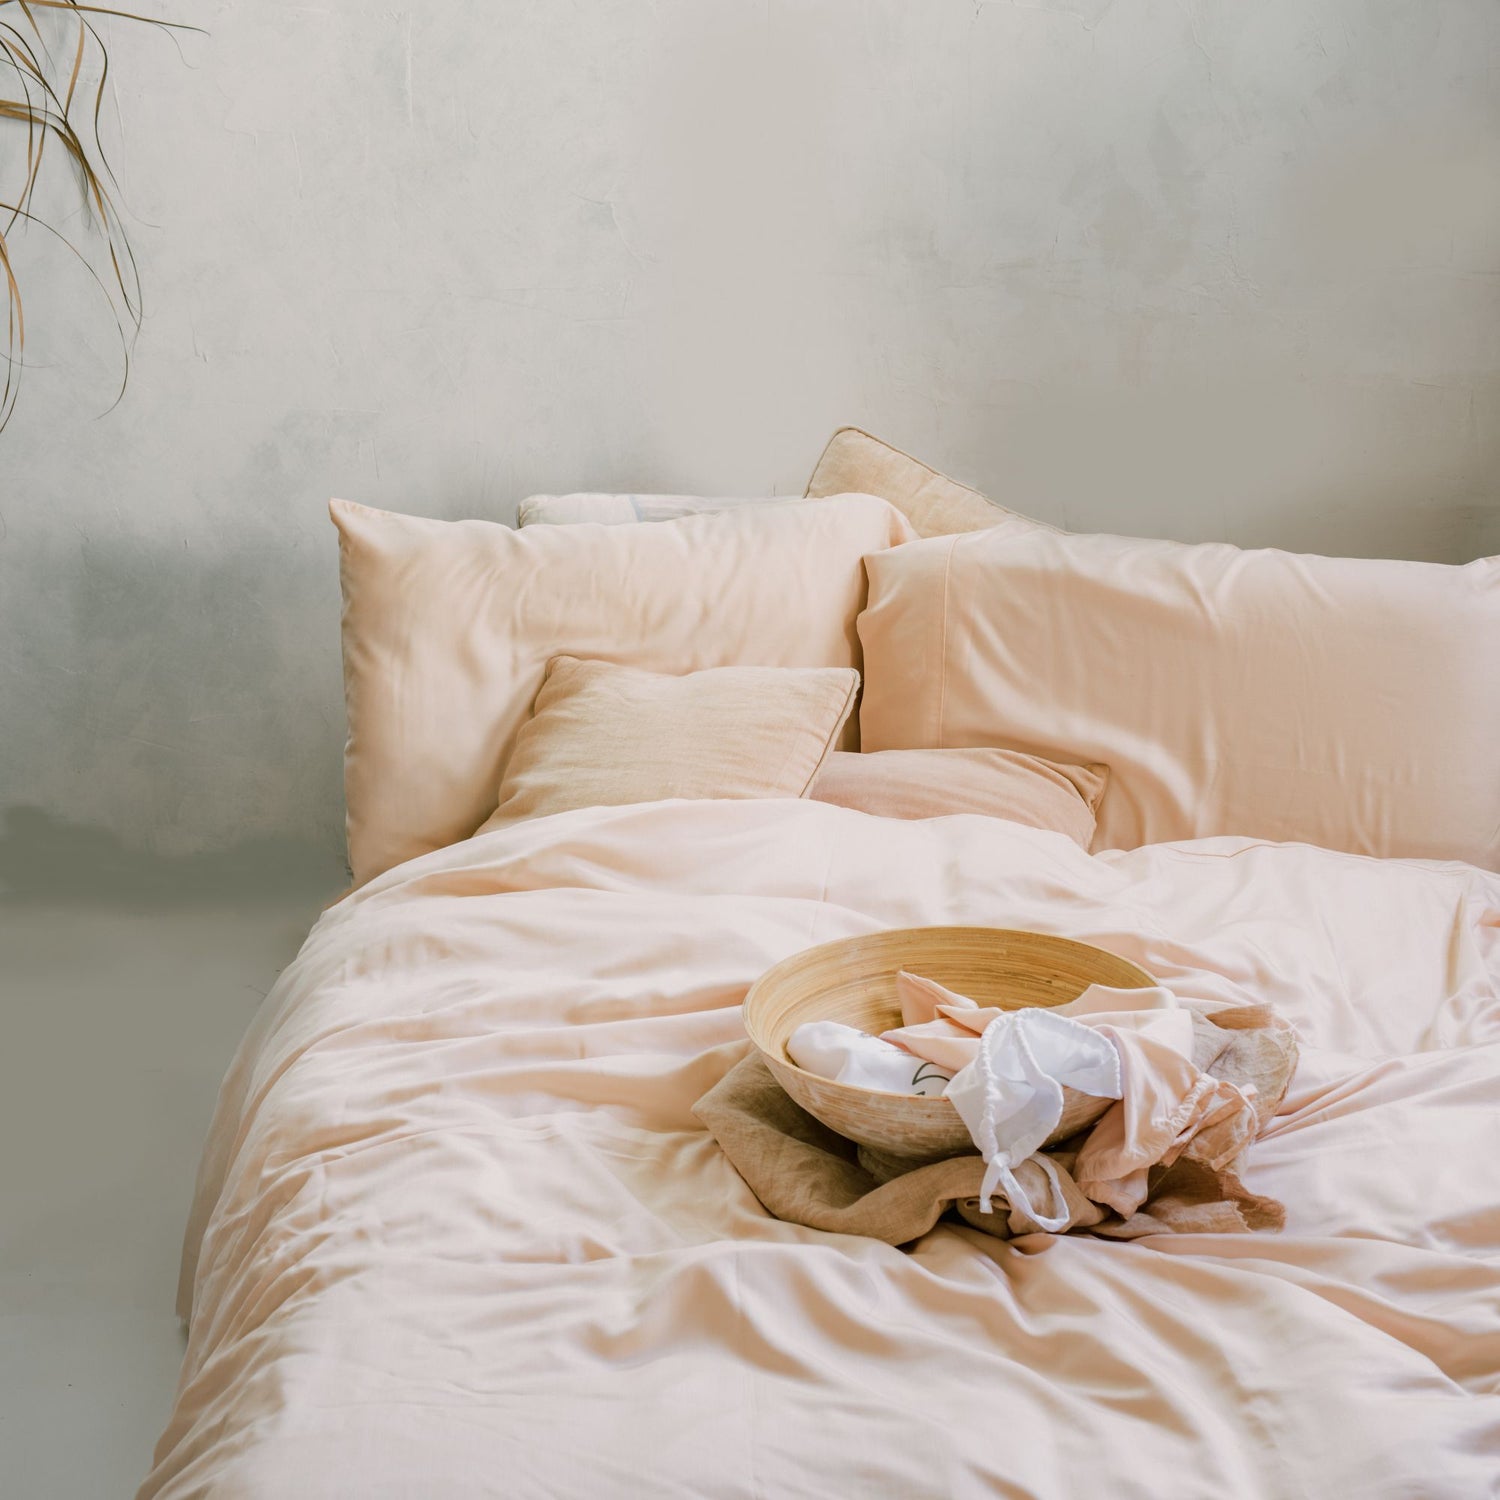 Level Up Your Bedding with NakedLab’s BambooSilk Bedsheets